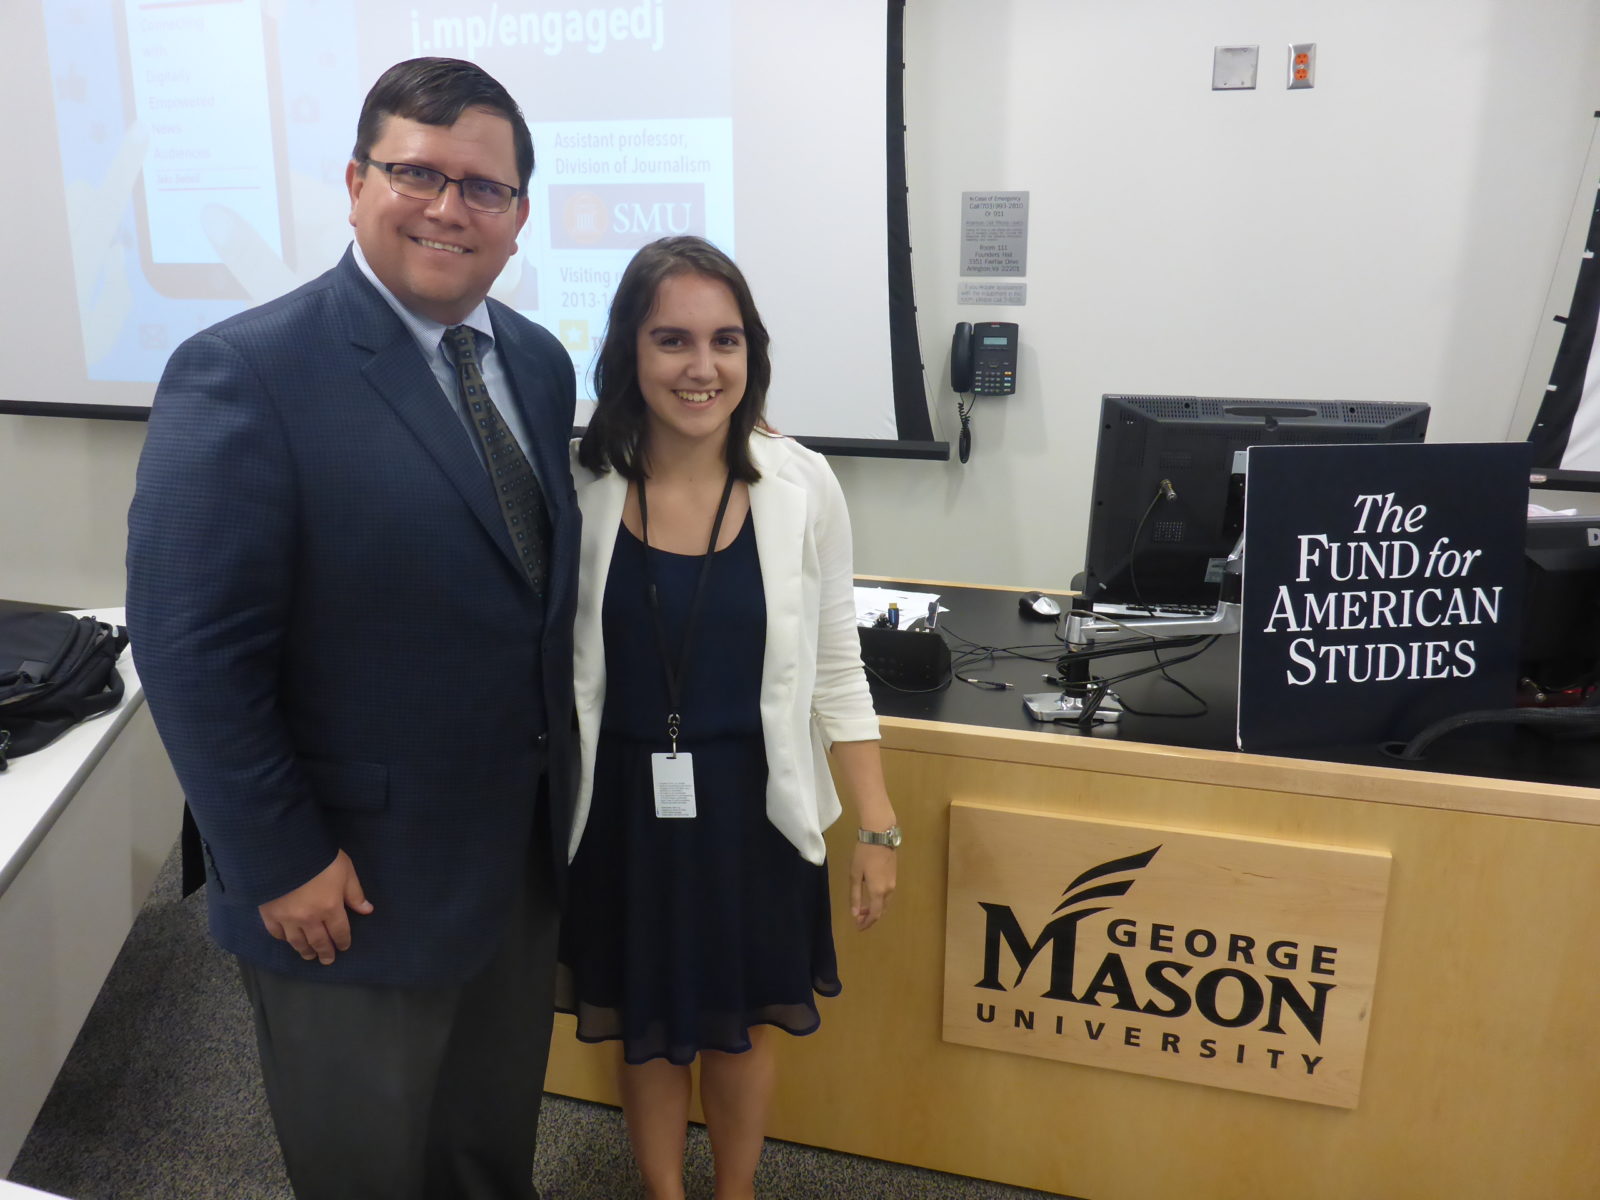 TFAS alumnus Jake Batsell (IPJ 94) poses with an IPJ student after his guest lecture about engaged journalism and his recently published book. 